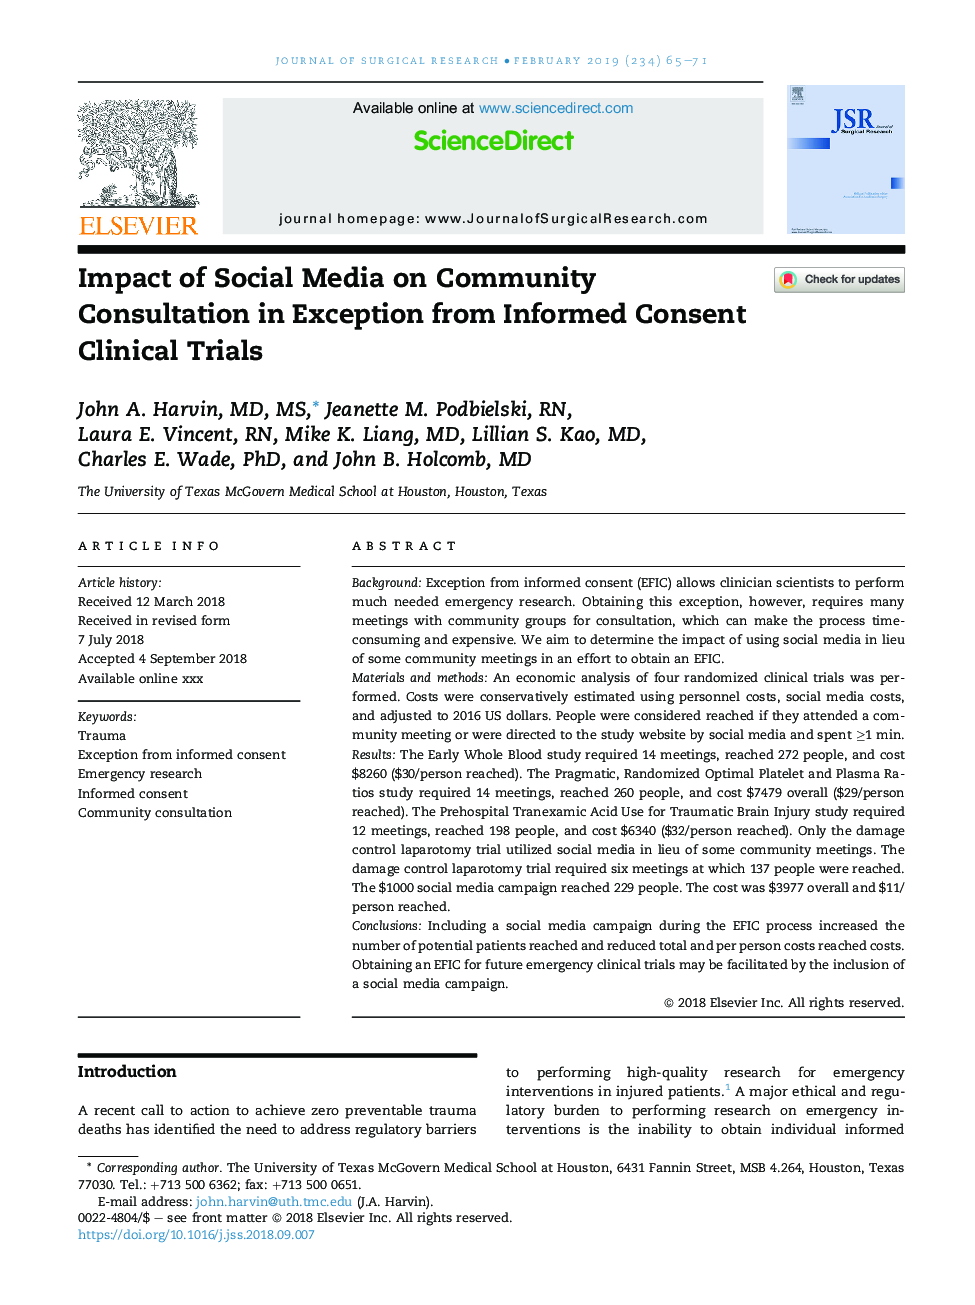 Impact of Social Media on Community Consultation in Exception from Informed Consent Clinical Trials